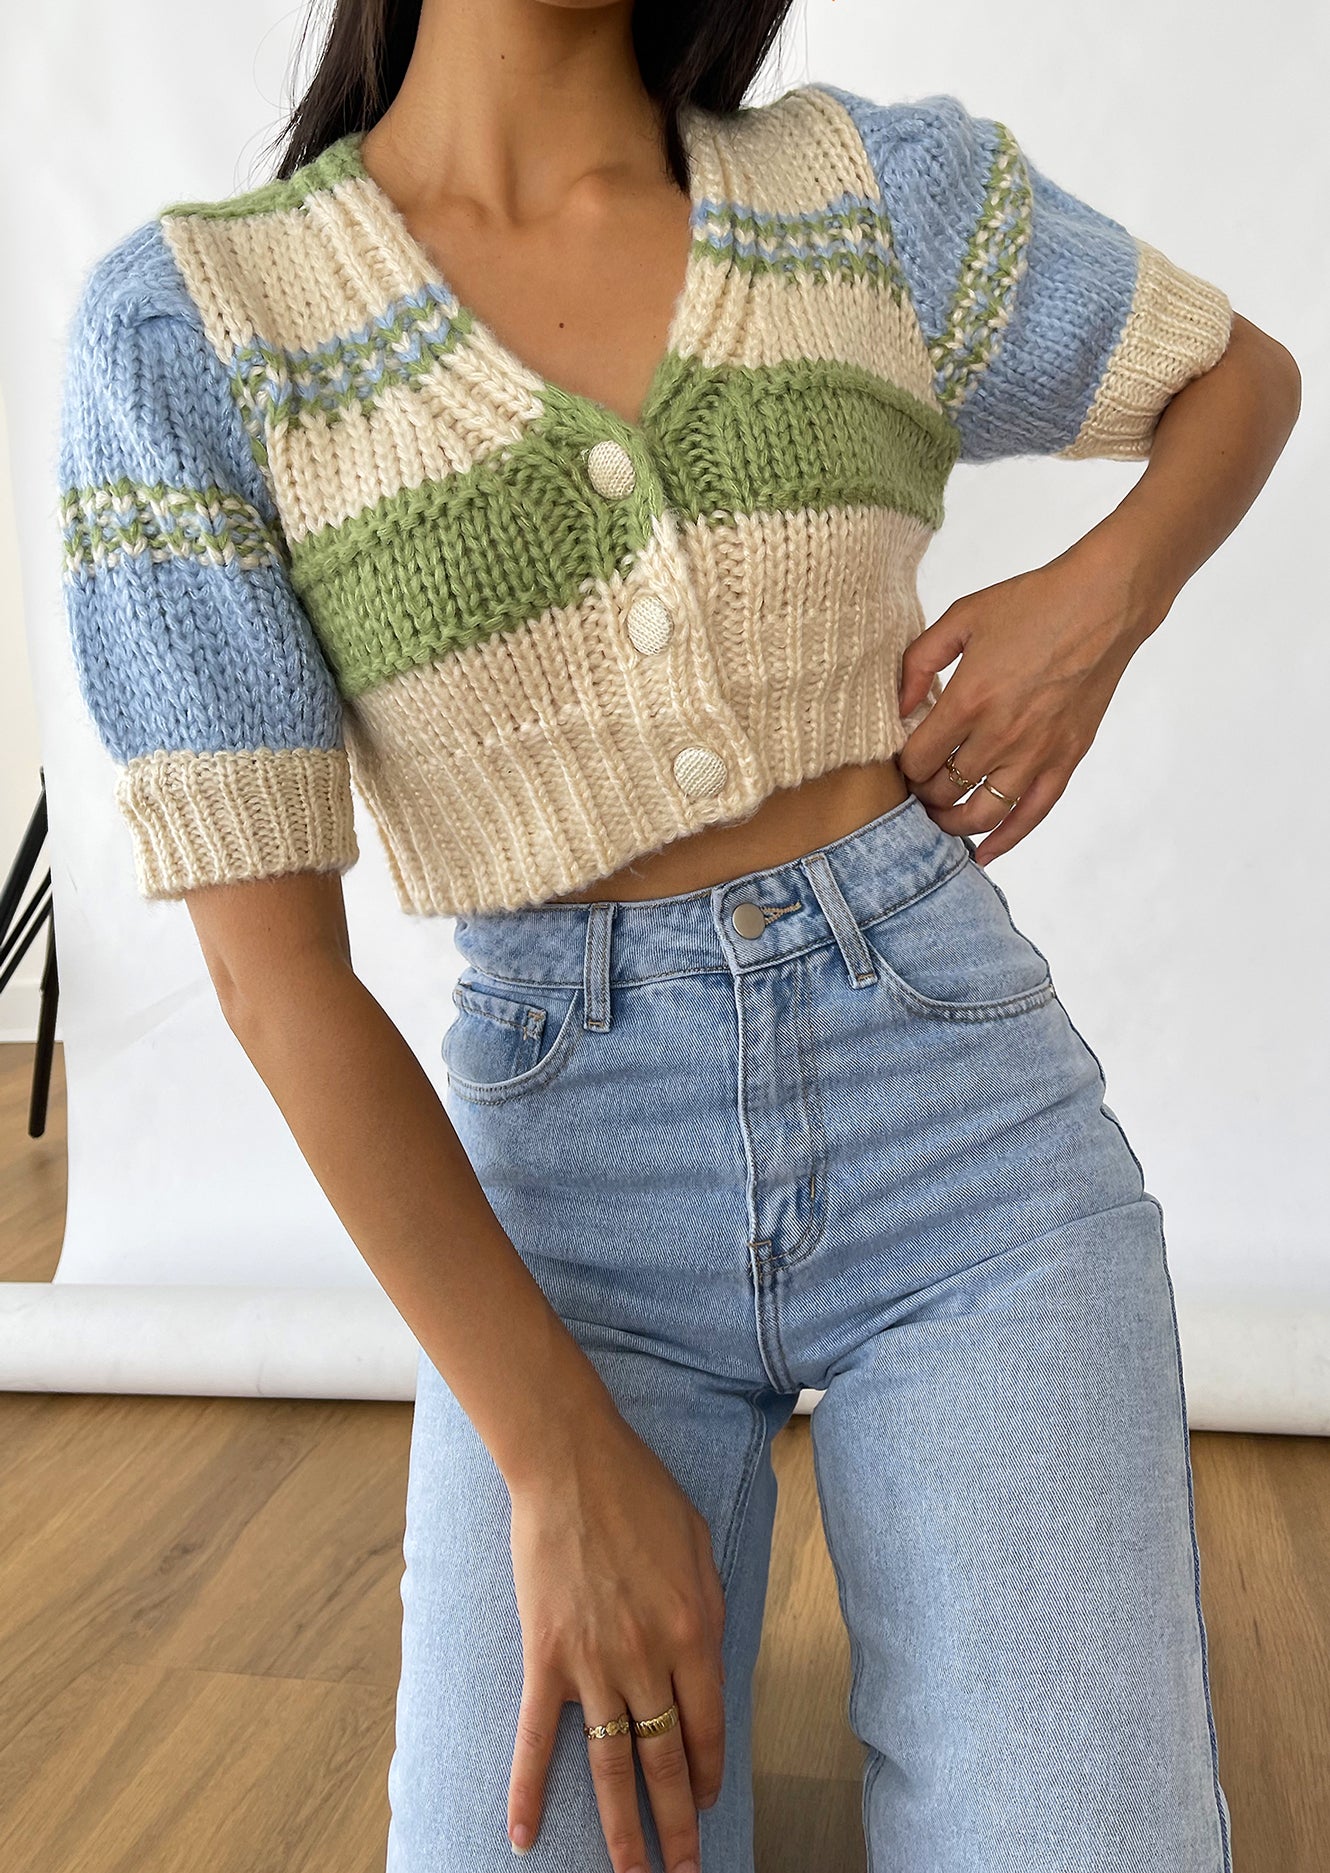 Chunky knitted colourblock crop cardigan